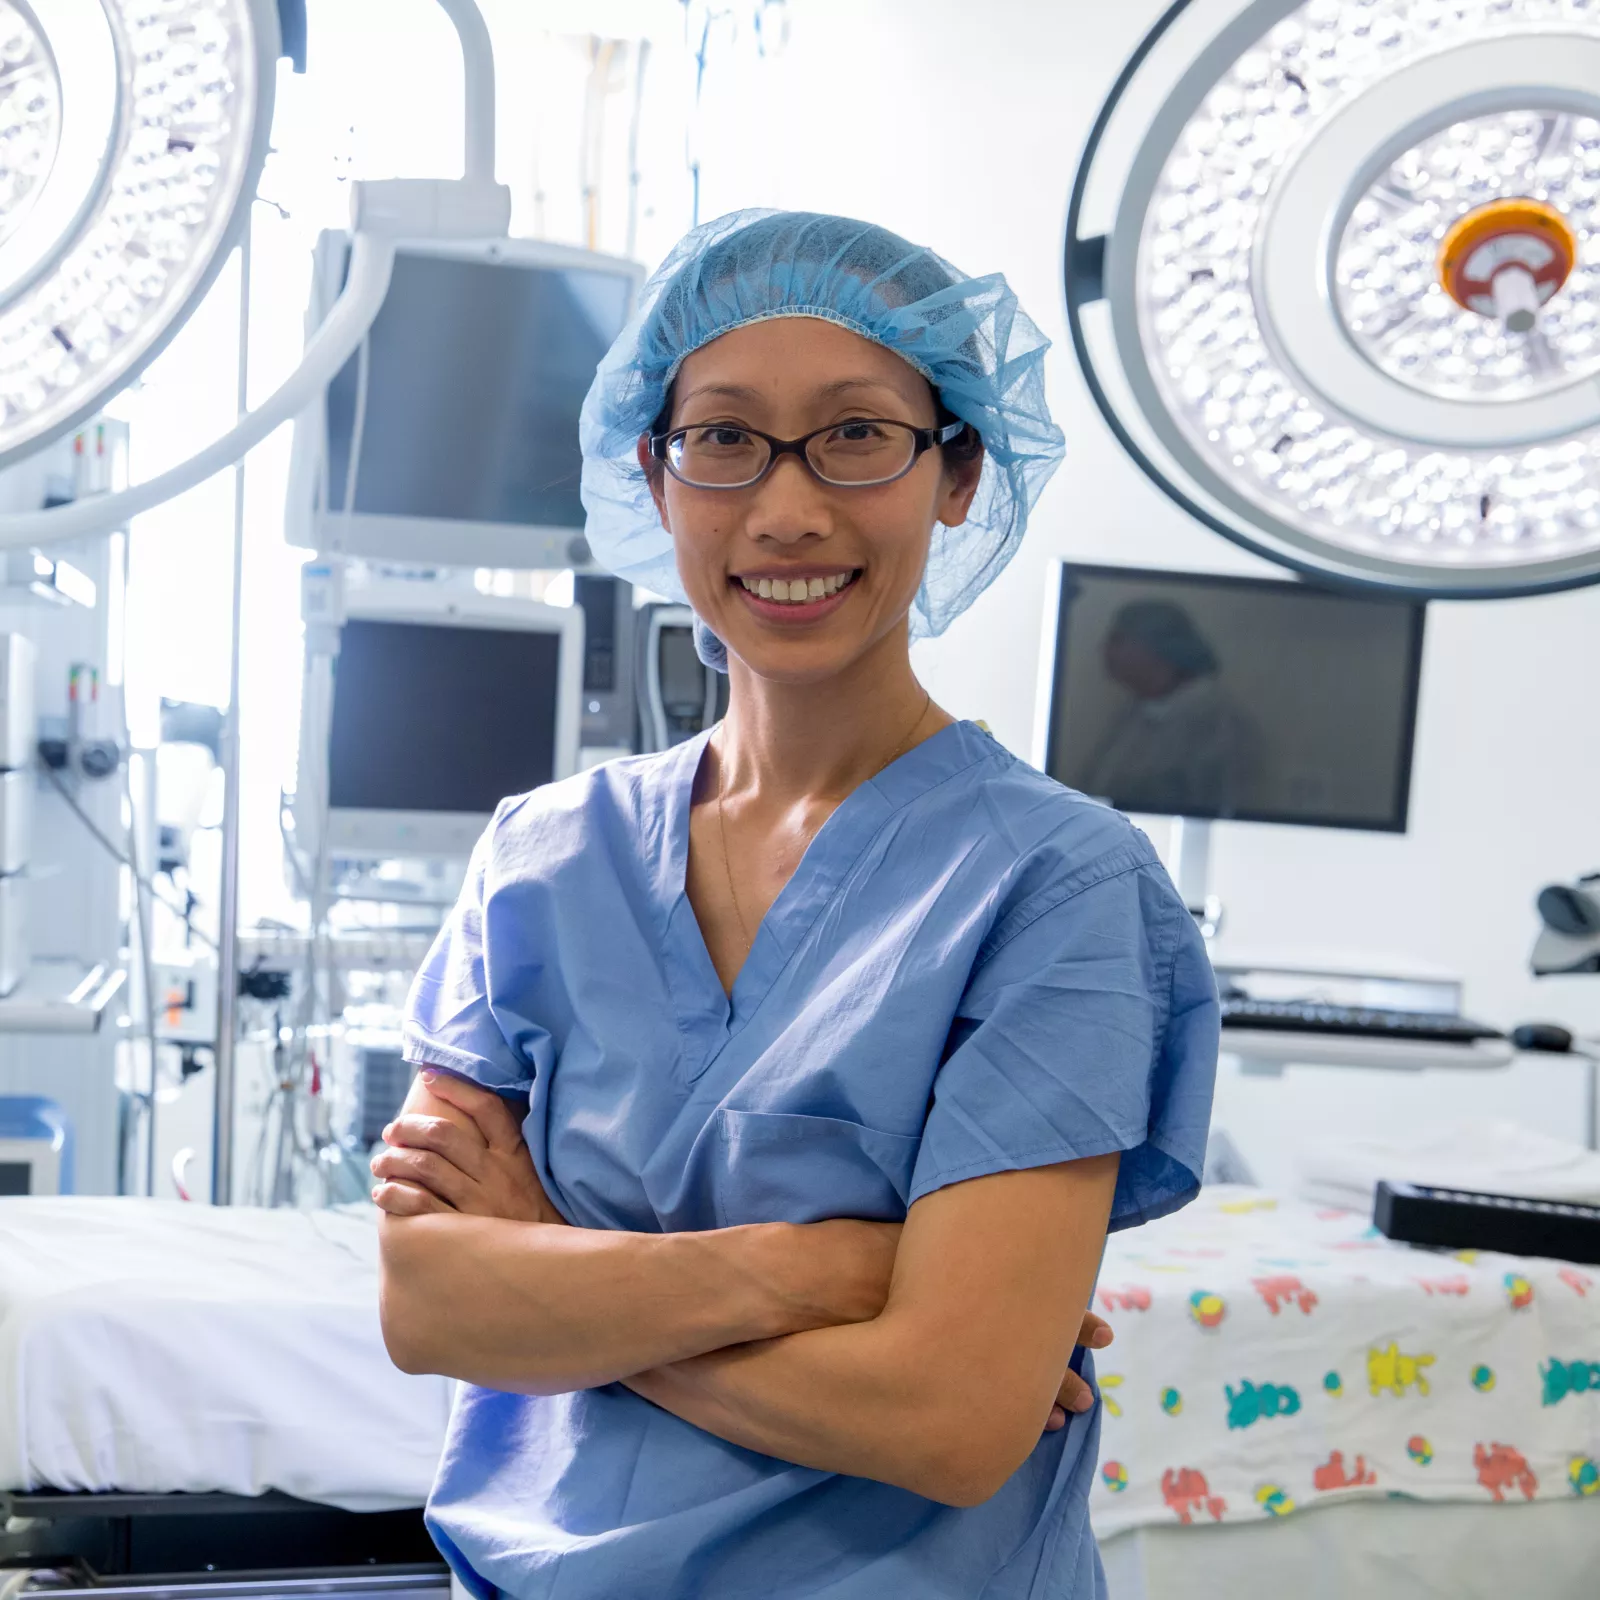 In the operation room with Lan Vu, MD